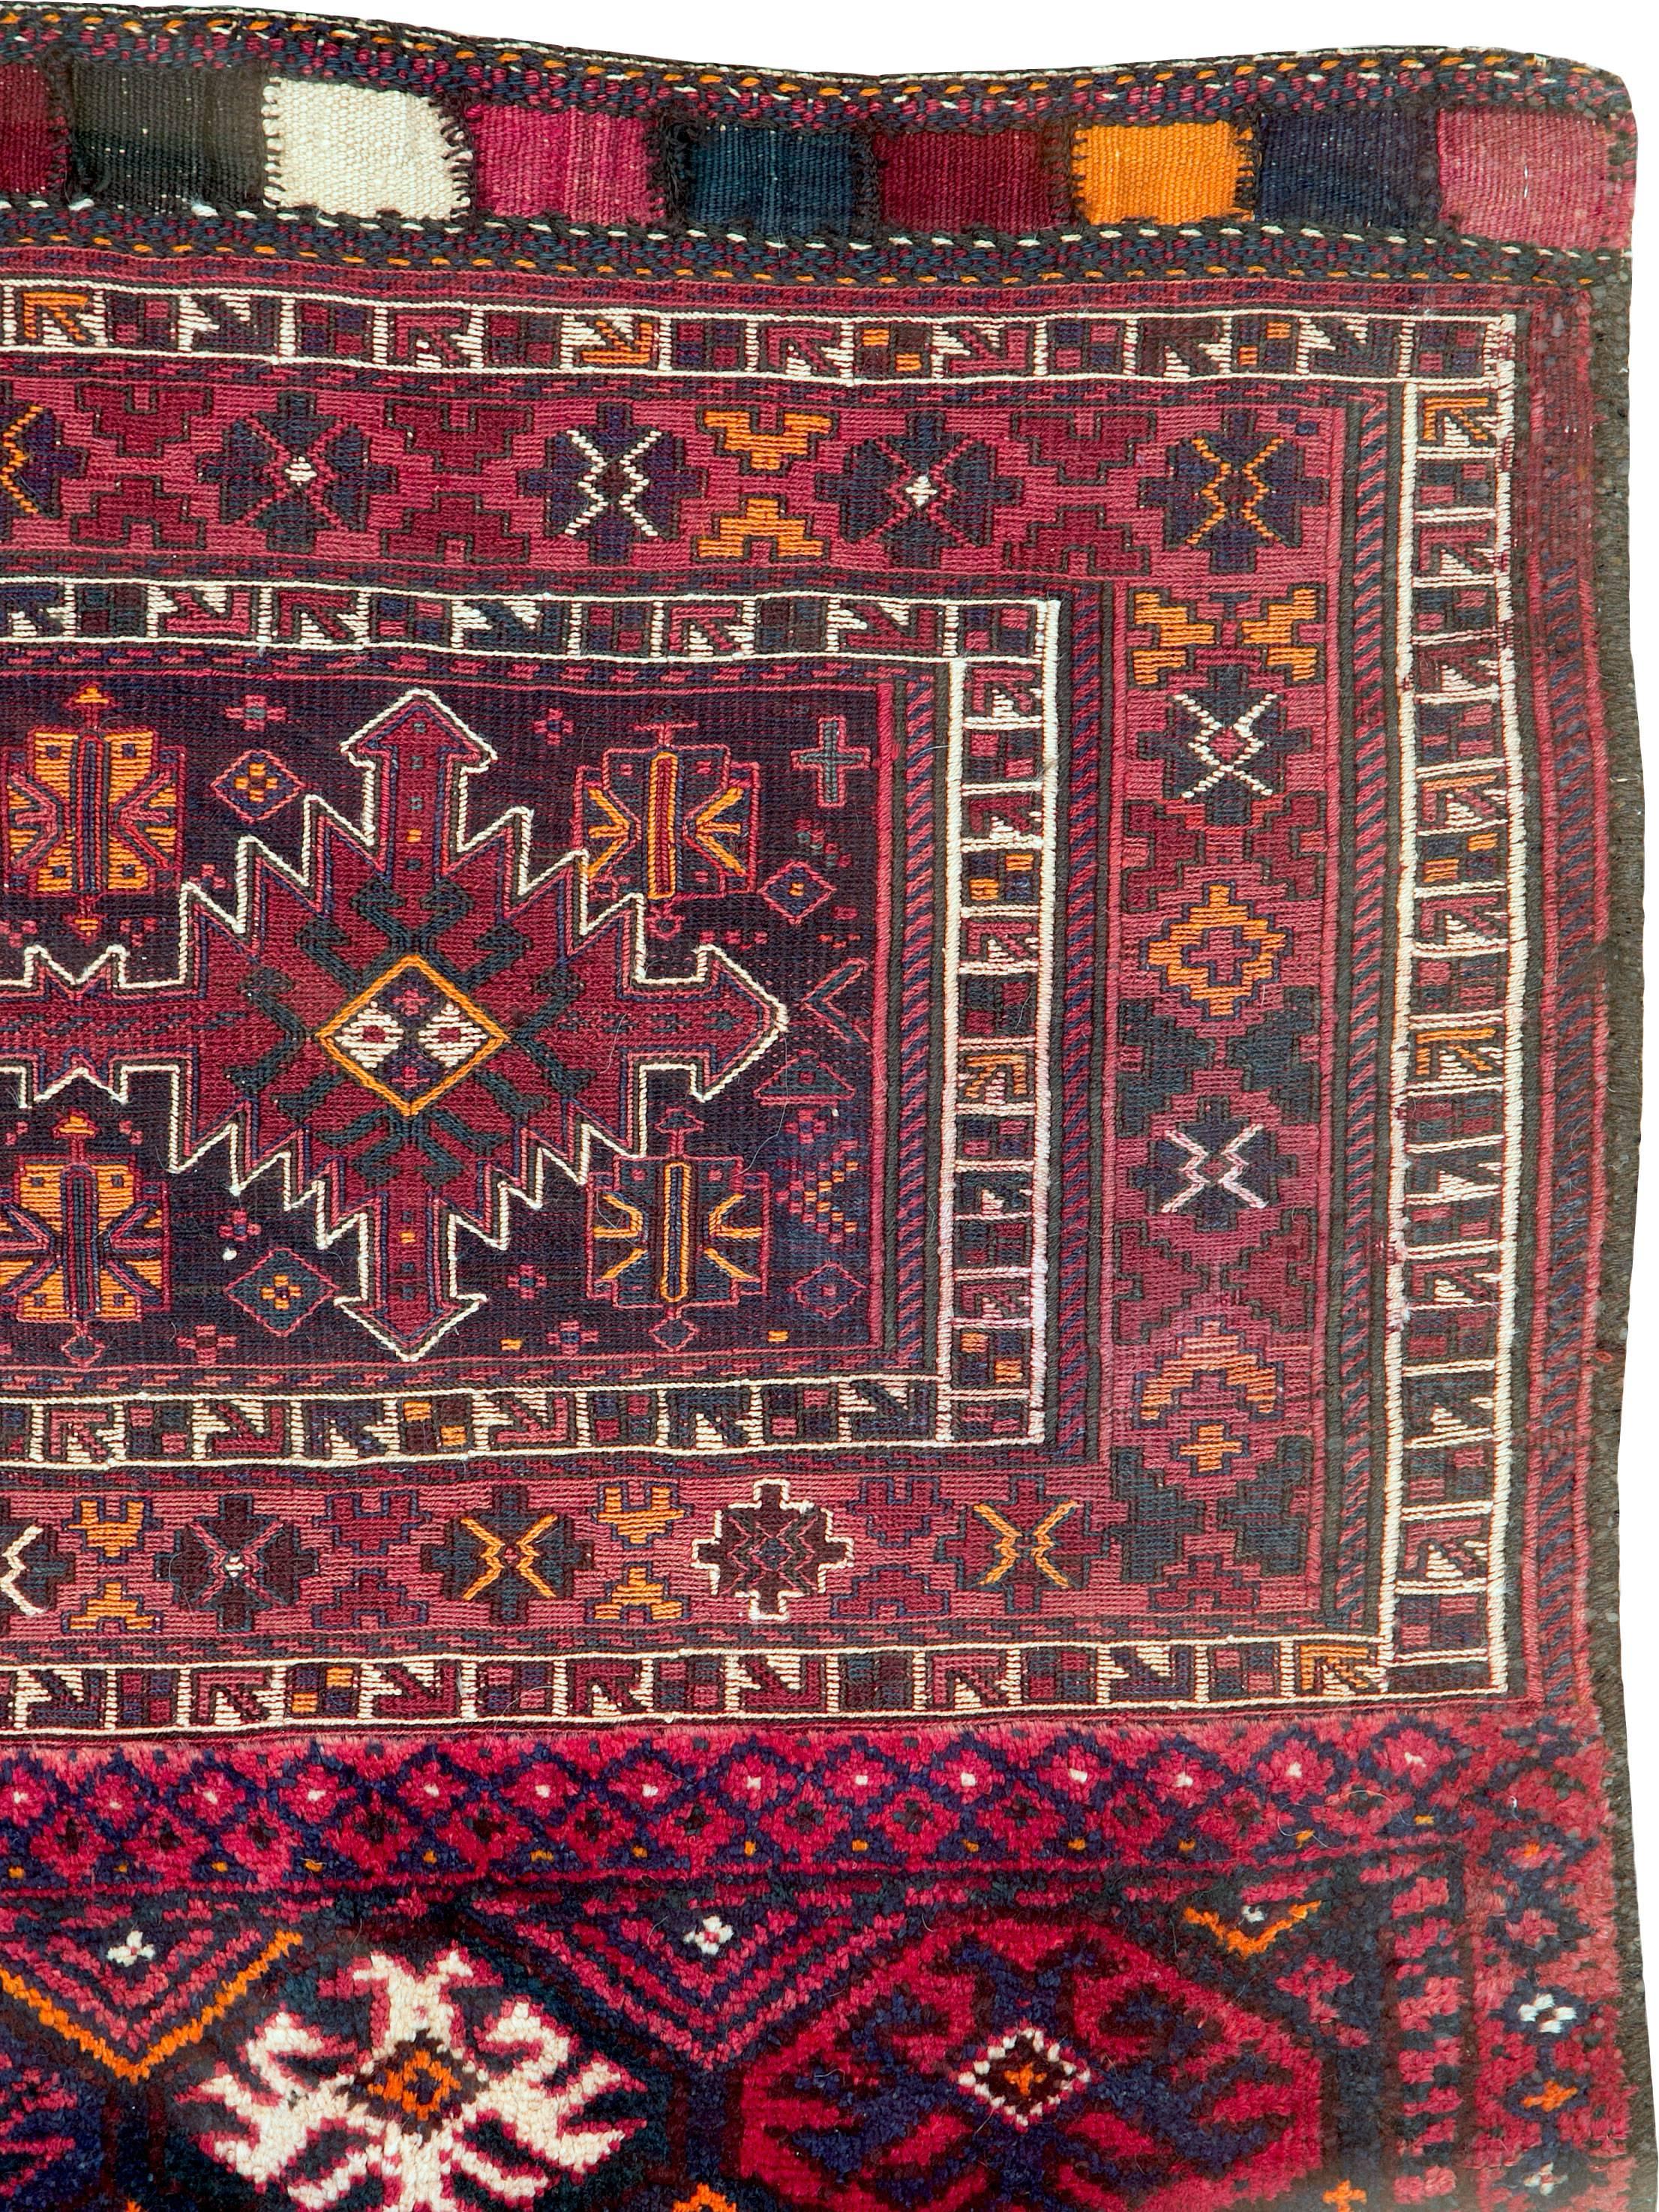 A vintage Uzbek Tribal carpet from the mid-20th century with both Soumak (flat-weave stitch) and pile.